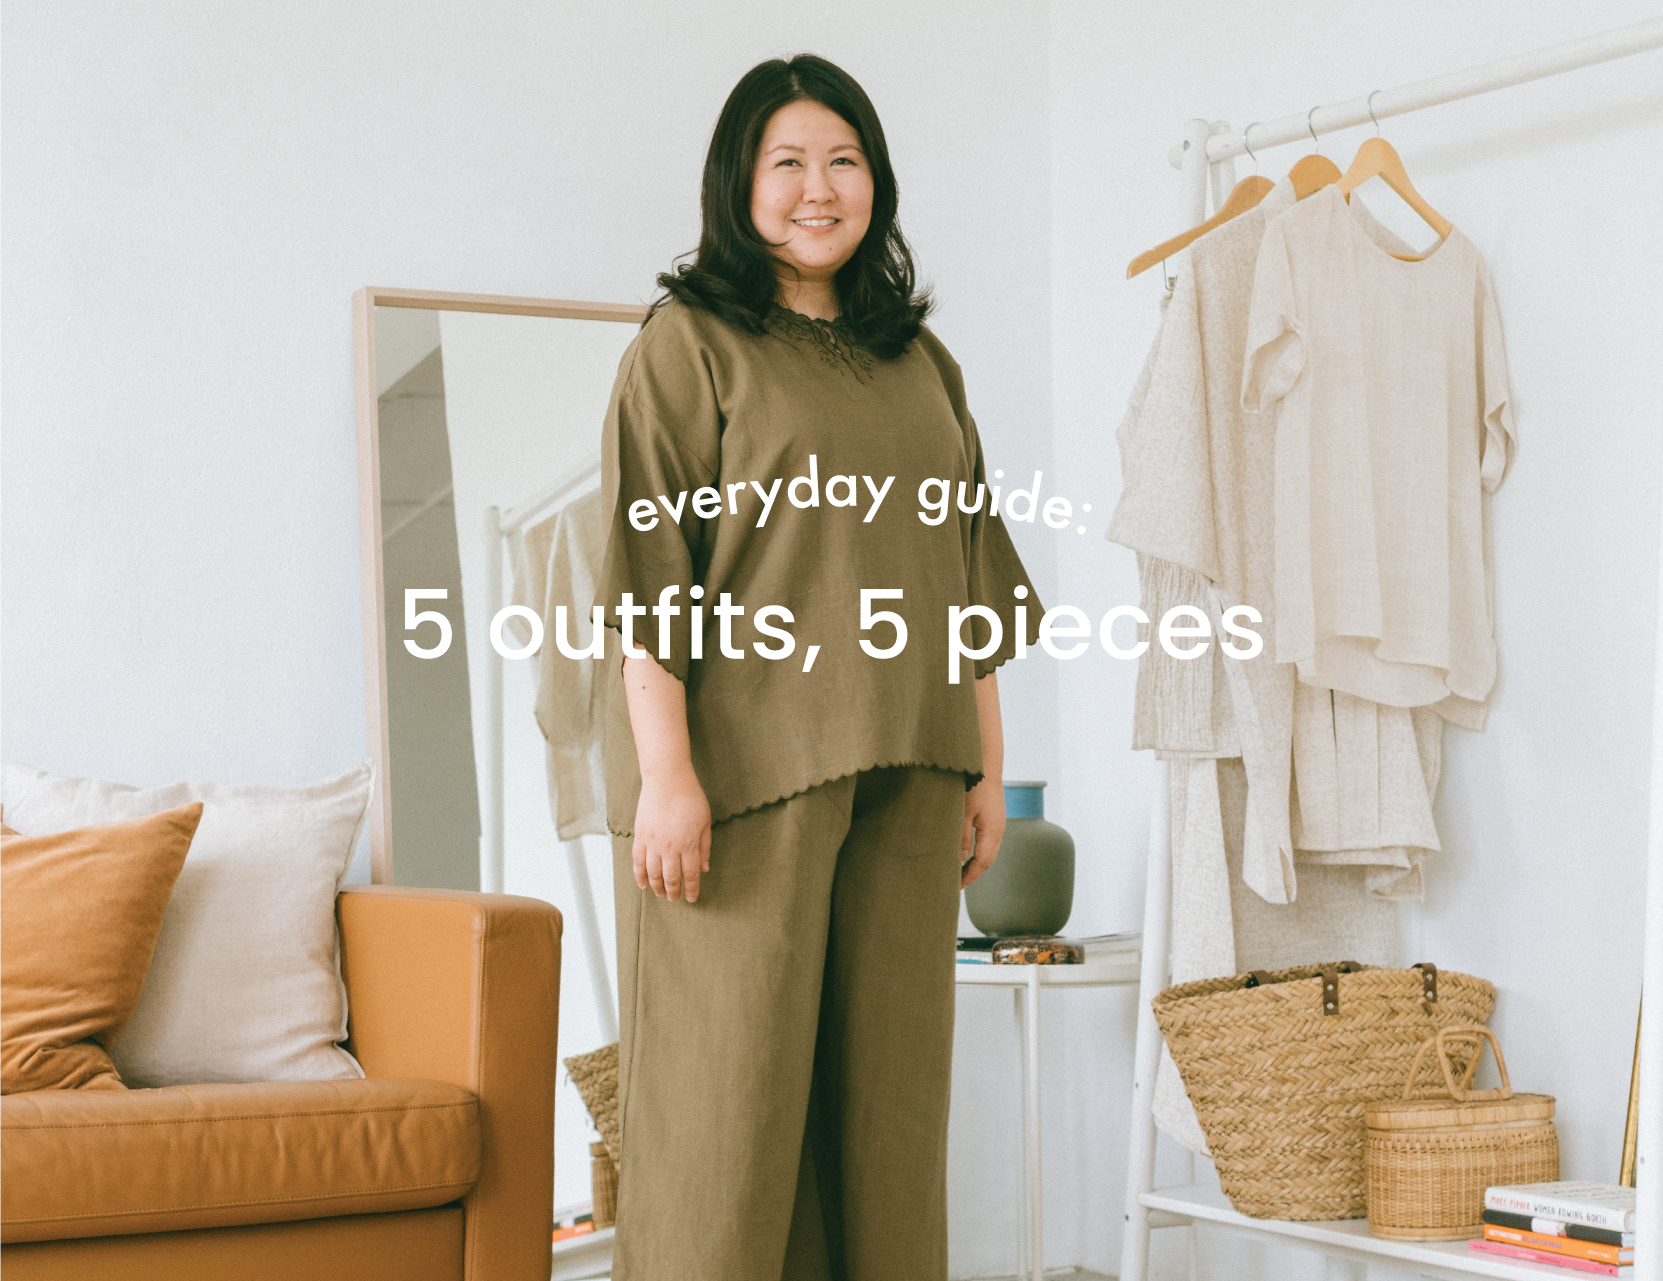 Everyday Guide: 5 looks from 5 easy pieces